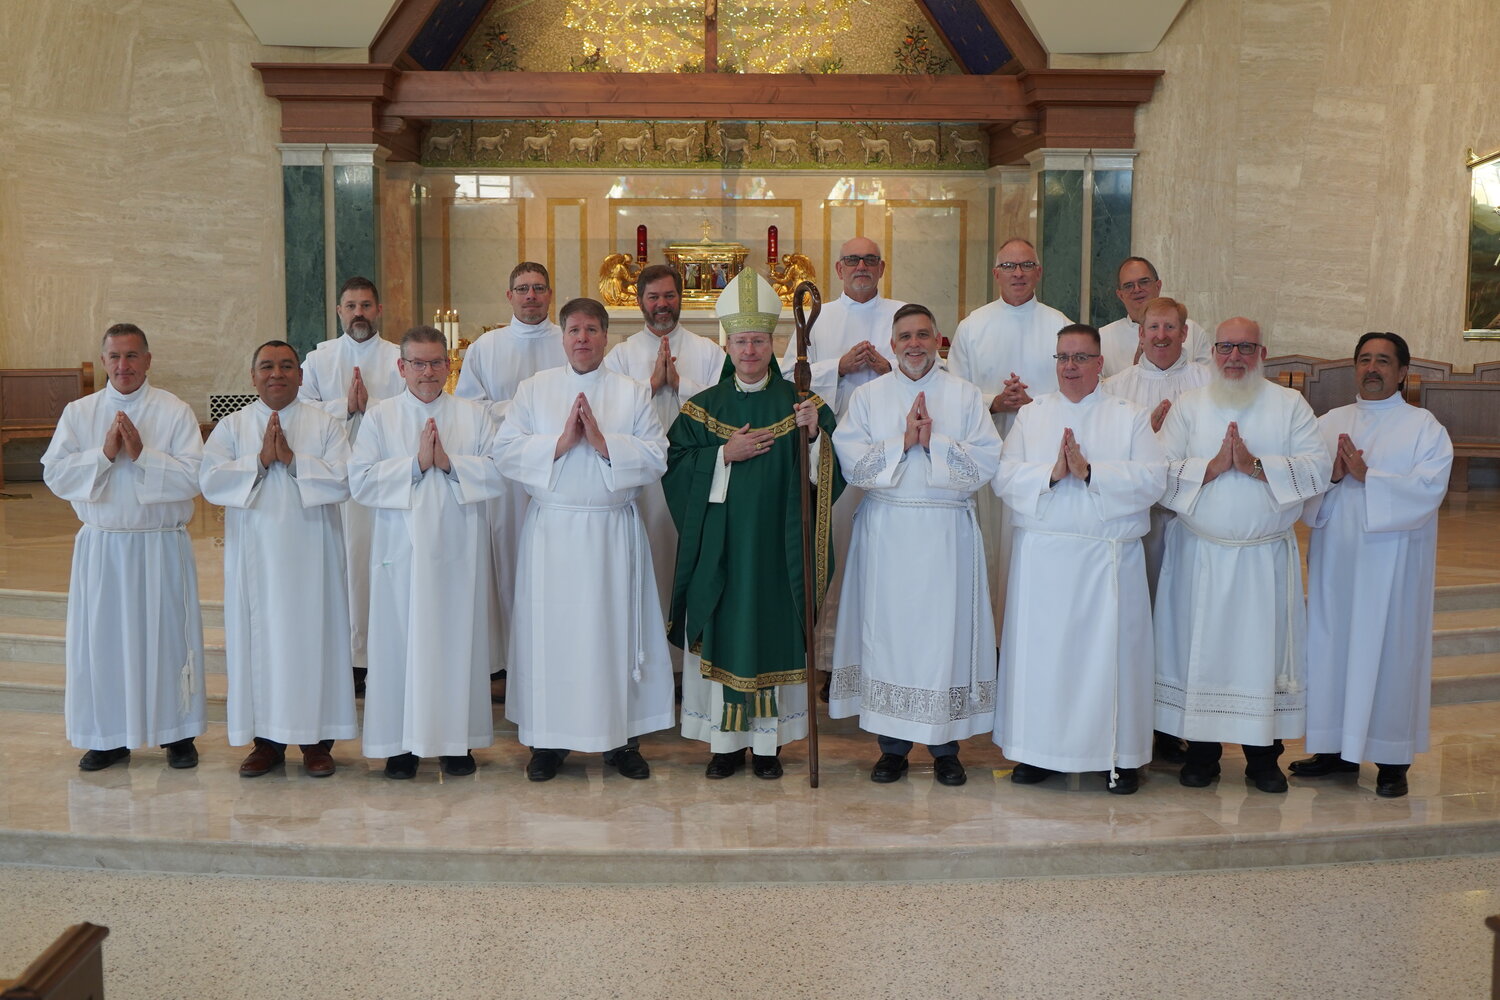 Fifteen candidates for the Permanent Diaconate — (First row) Michael Dorrell, Osmaro DeLeon, Robert Czarnecki, Kenneth Arthur, Edward Galbraith, Dwayne Goodwin, James Rangitsch Jr., Charles Ochoa, (second row, far right) Brian Lutz, (third row) Harvey Million Jr., Chad Freie, Louie Delk, Denis Gladbach, Keith Henke and Mark Oligschlaeger — join Bishop W. Shawn McKnight in the sanctuary of the Cathedral of St. Joseph Nov. 5 after he instituted them as lectors.